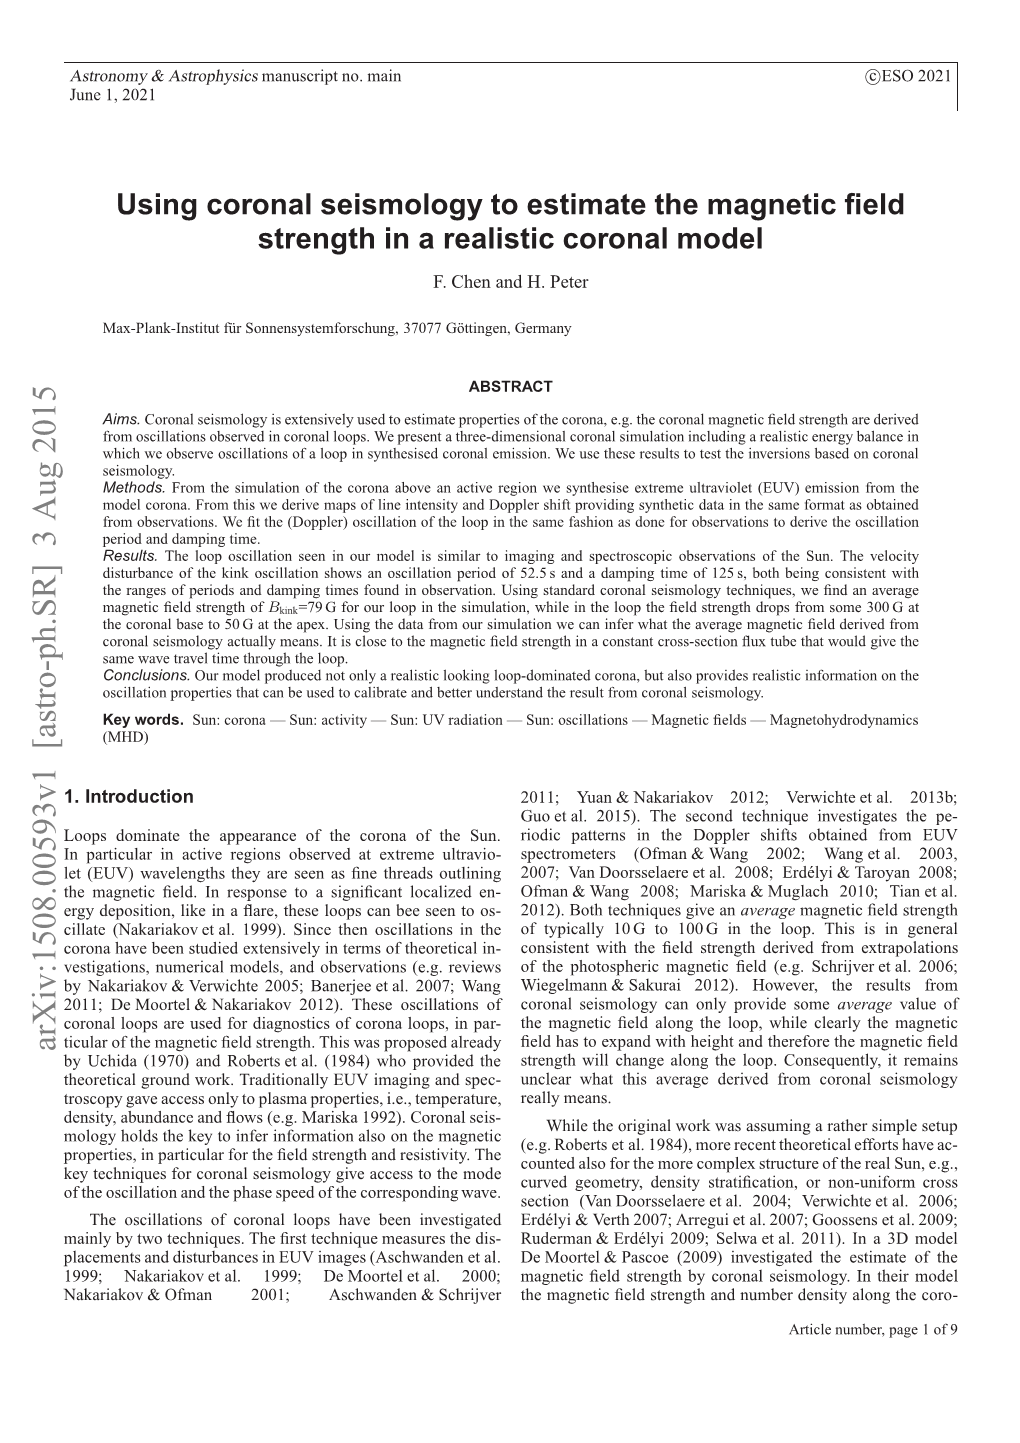 Using Coronal Seismology to Estimate the Magnetic Field Strength in a Realistic Coronal Model